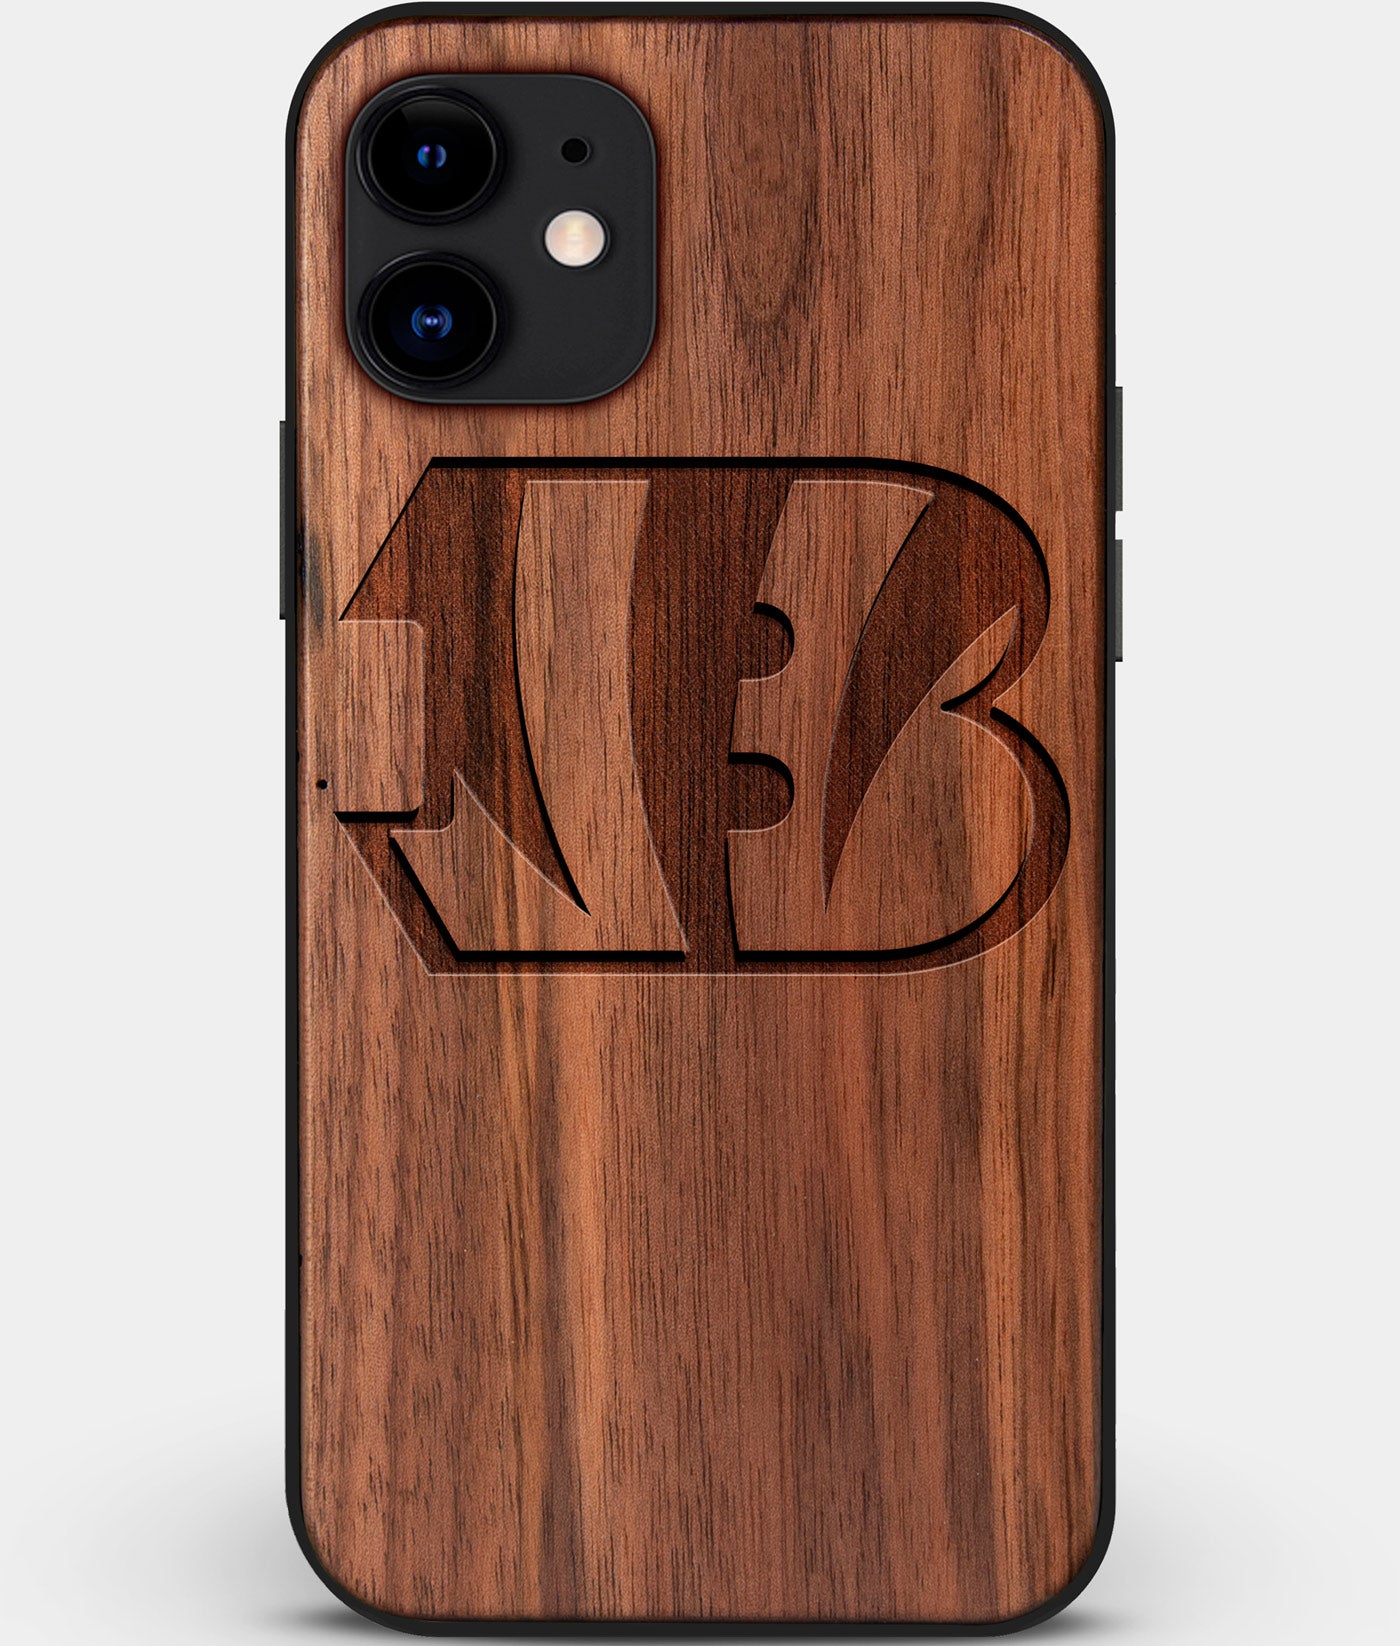 Custom Carved Wood Cincinnati Bengals iPhone 11 Case | Personalized Walnut Wood Cincinnati Bengals Cover, Birthday Gift, Gifts For Him, Monogrammed Gift For Fan | by Engraved In Nature